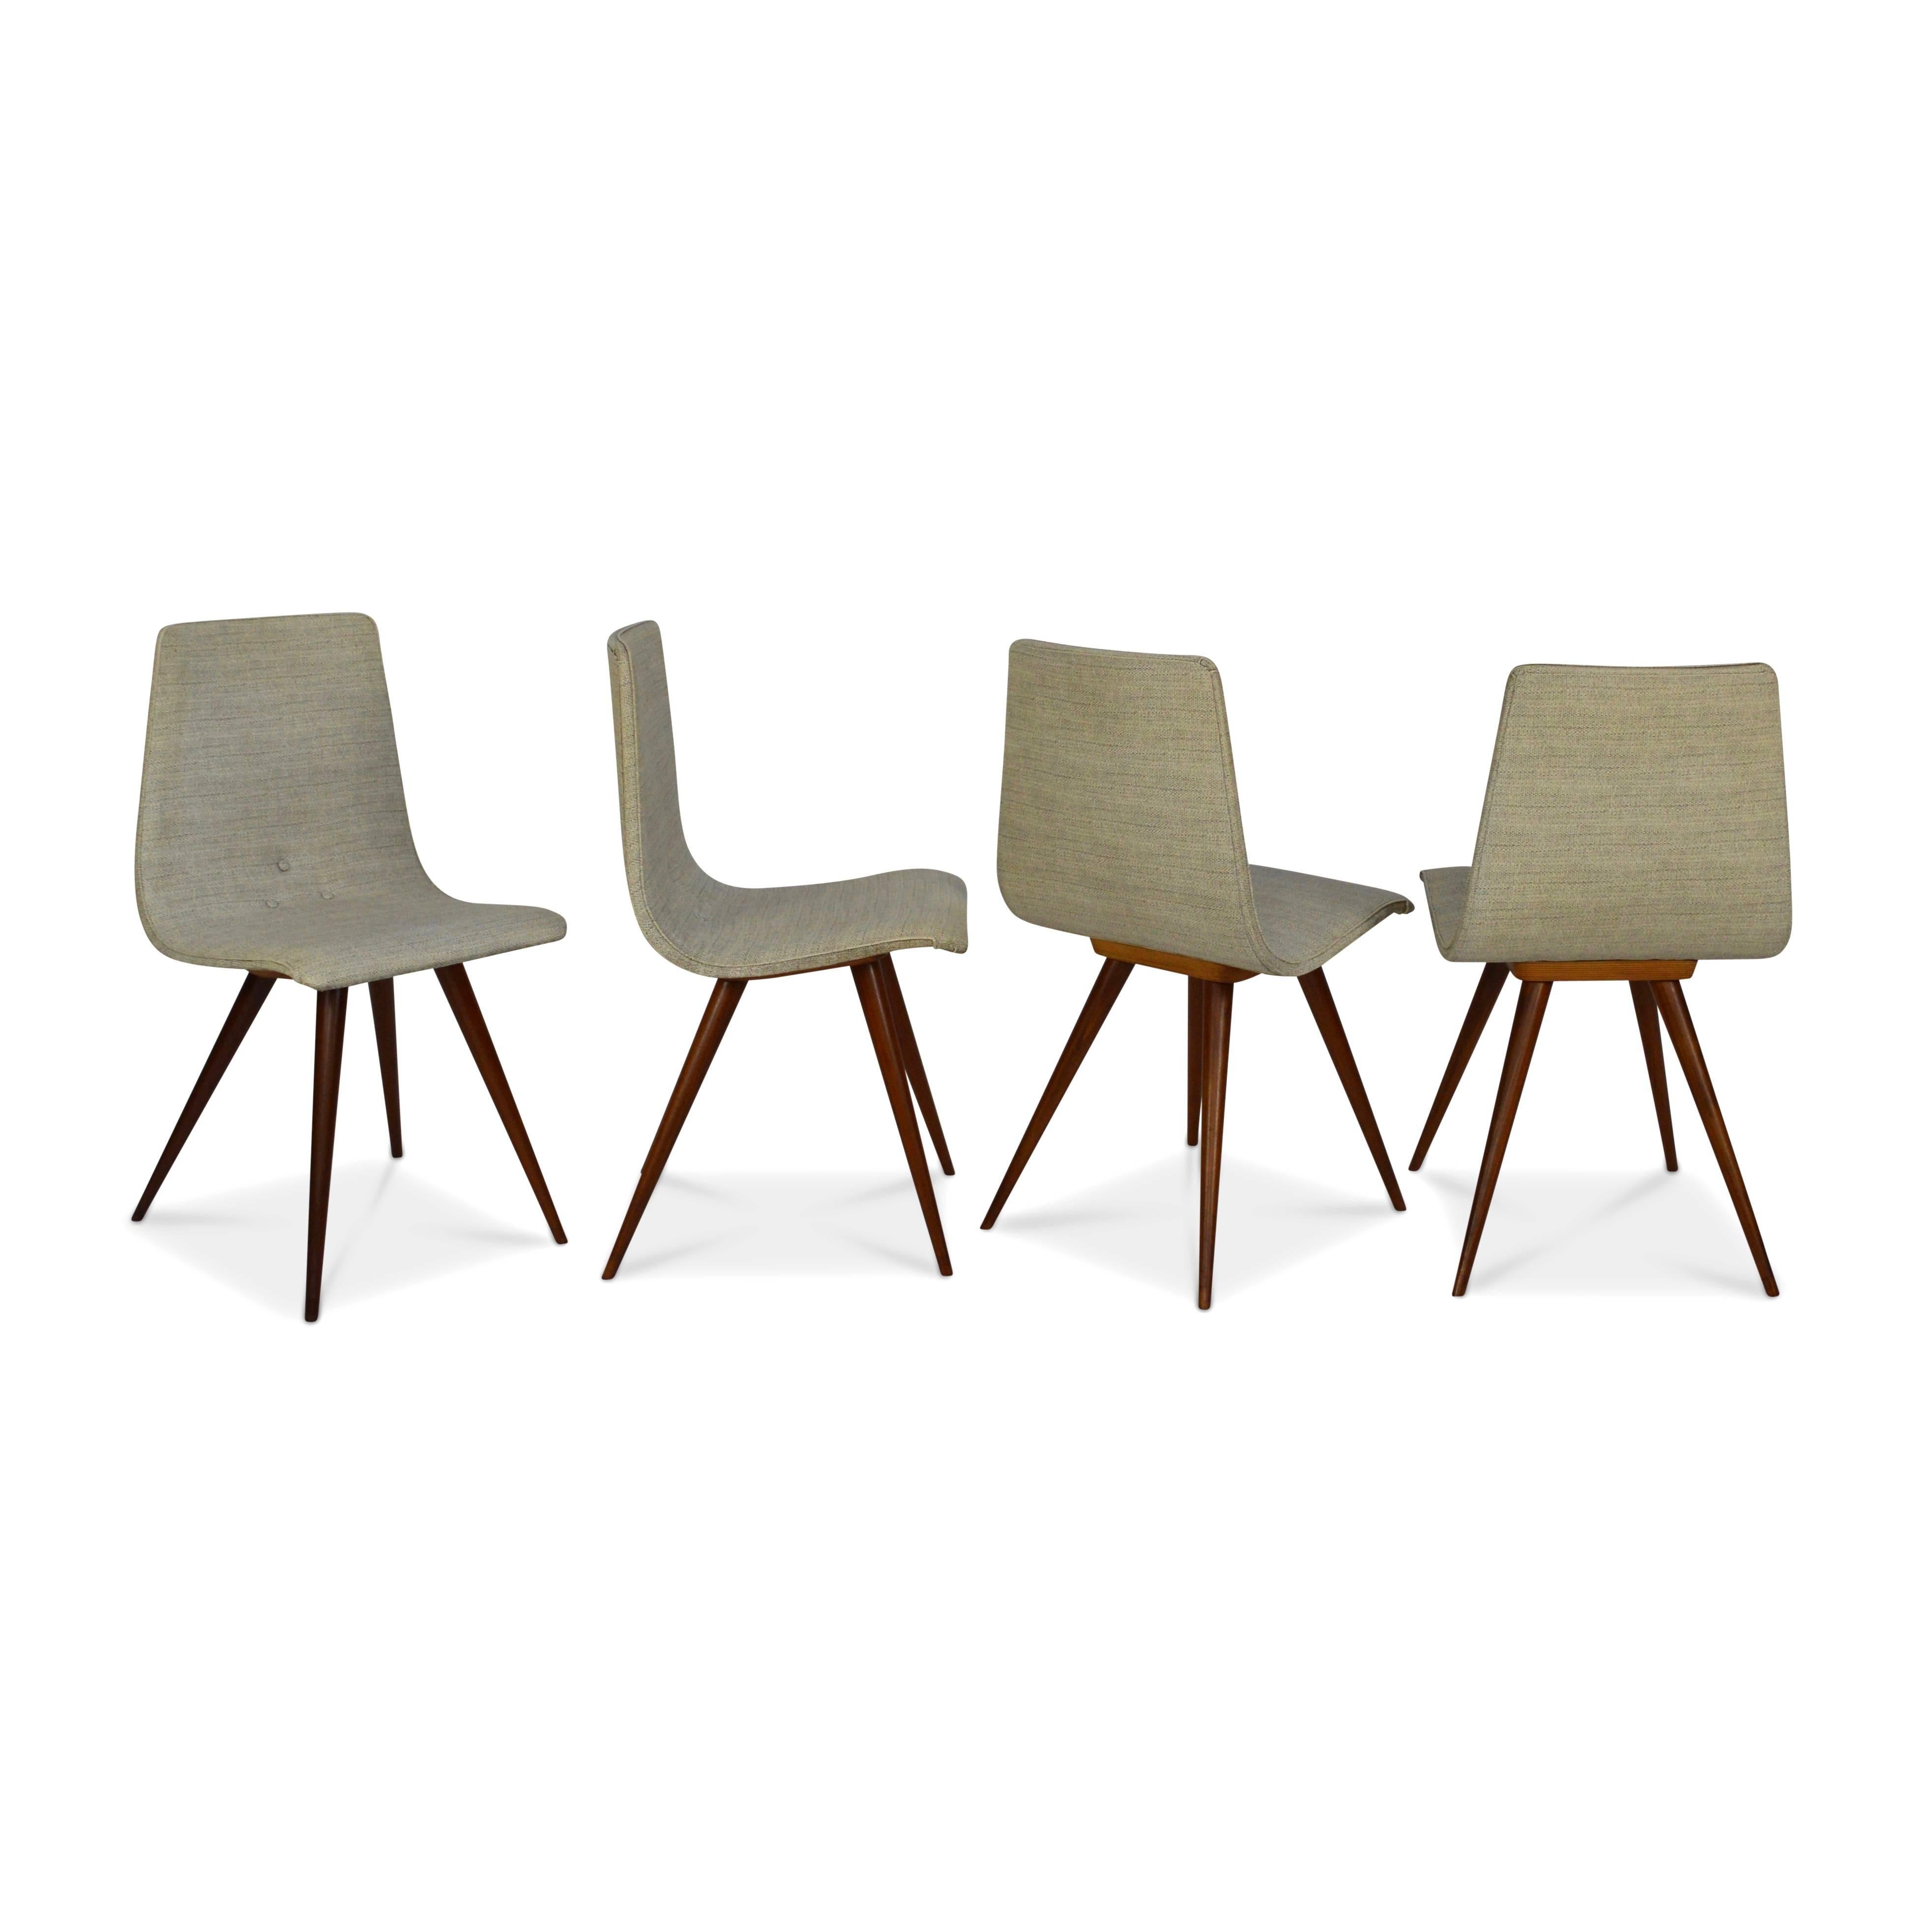 Elegant set of four dining chairs with beautiful solid teak spiderlegs and organic shaped seats. Still completely original.

Designer: Unknown
Manufacturer: Unknown
Country: Netherlands
Model: Dining chairs
Designed in: 1950s
Date of